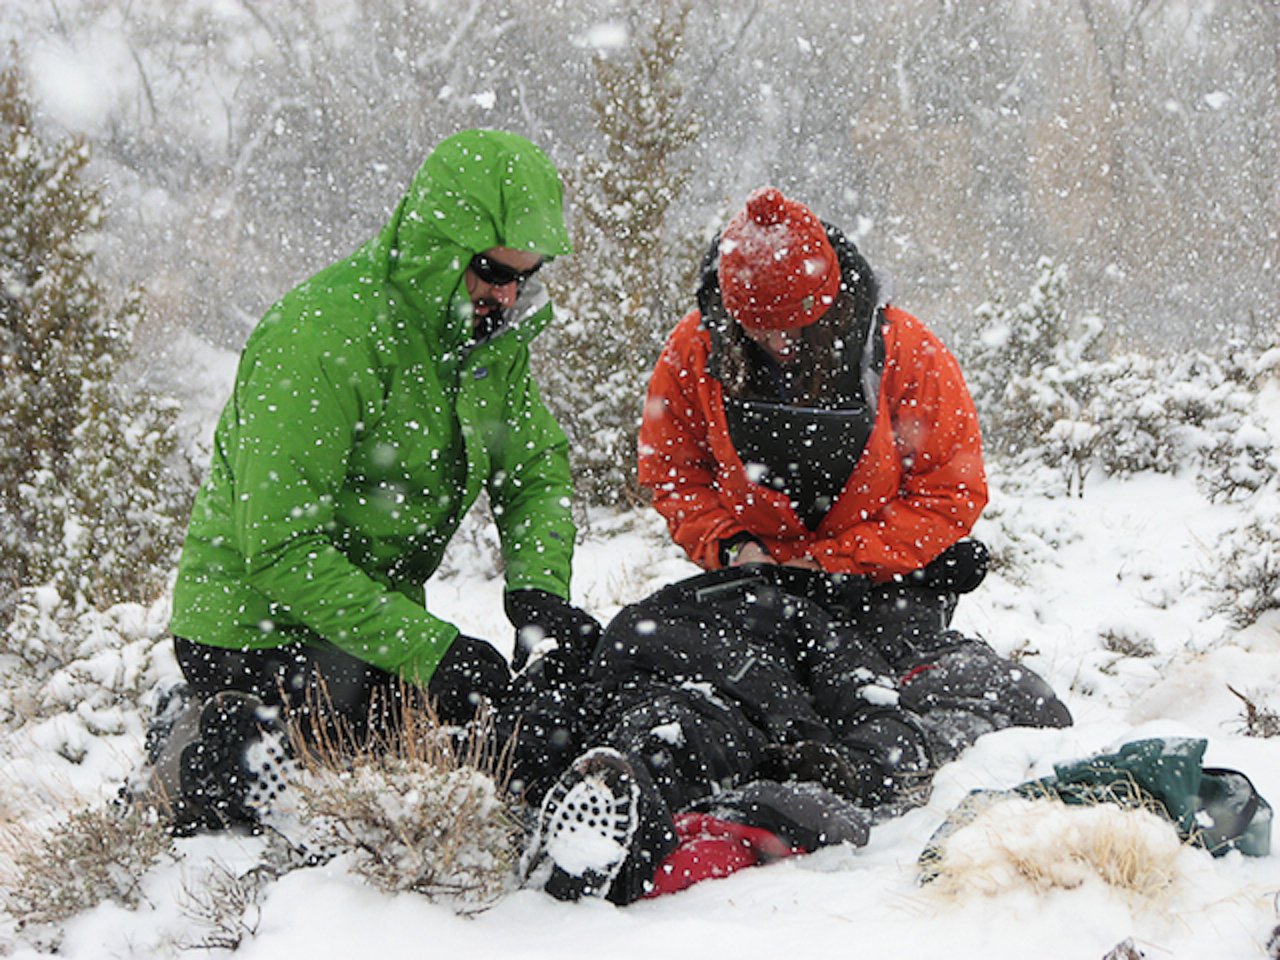 two NOLS Wilderness Medicine students practice for a patient lying on the ground on a snowy day